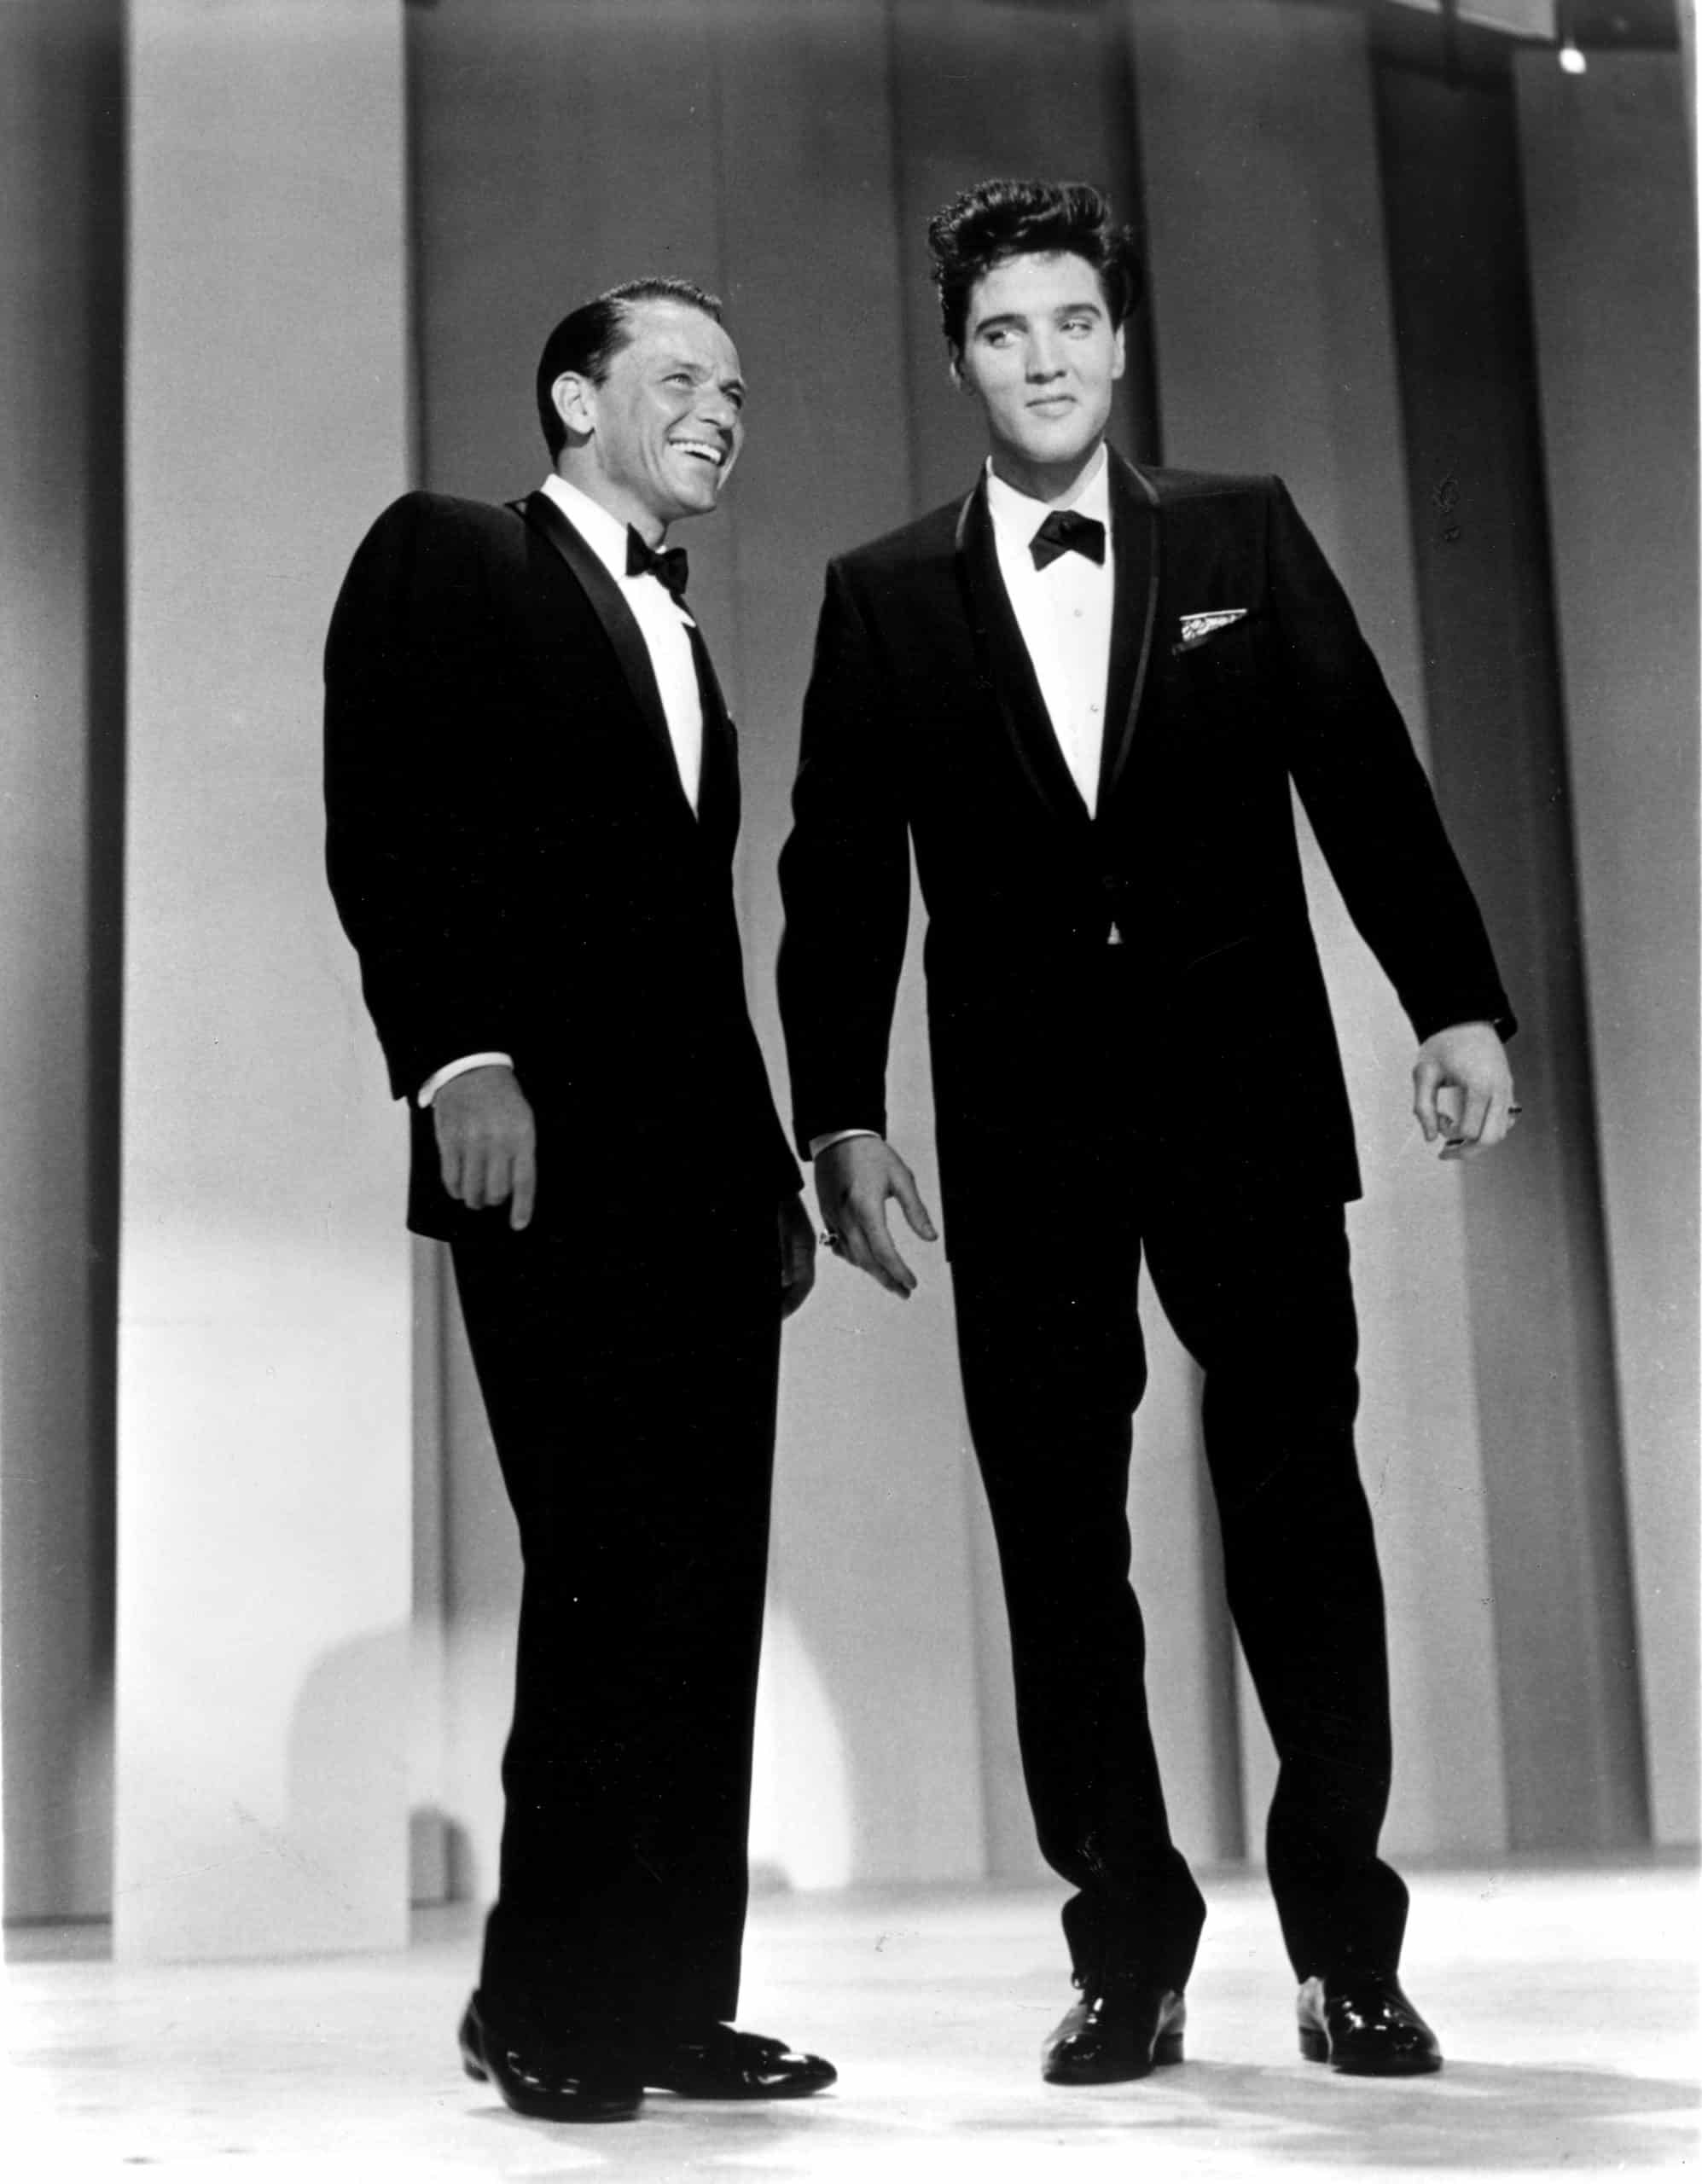 FRANK SINATRA'S WELCOME HOME PARTY FOR ELVIS PRESLEY, from left, Frank Sinatra, Elvis Presley